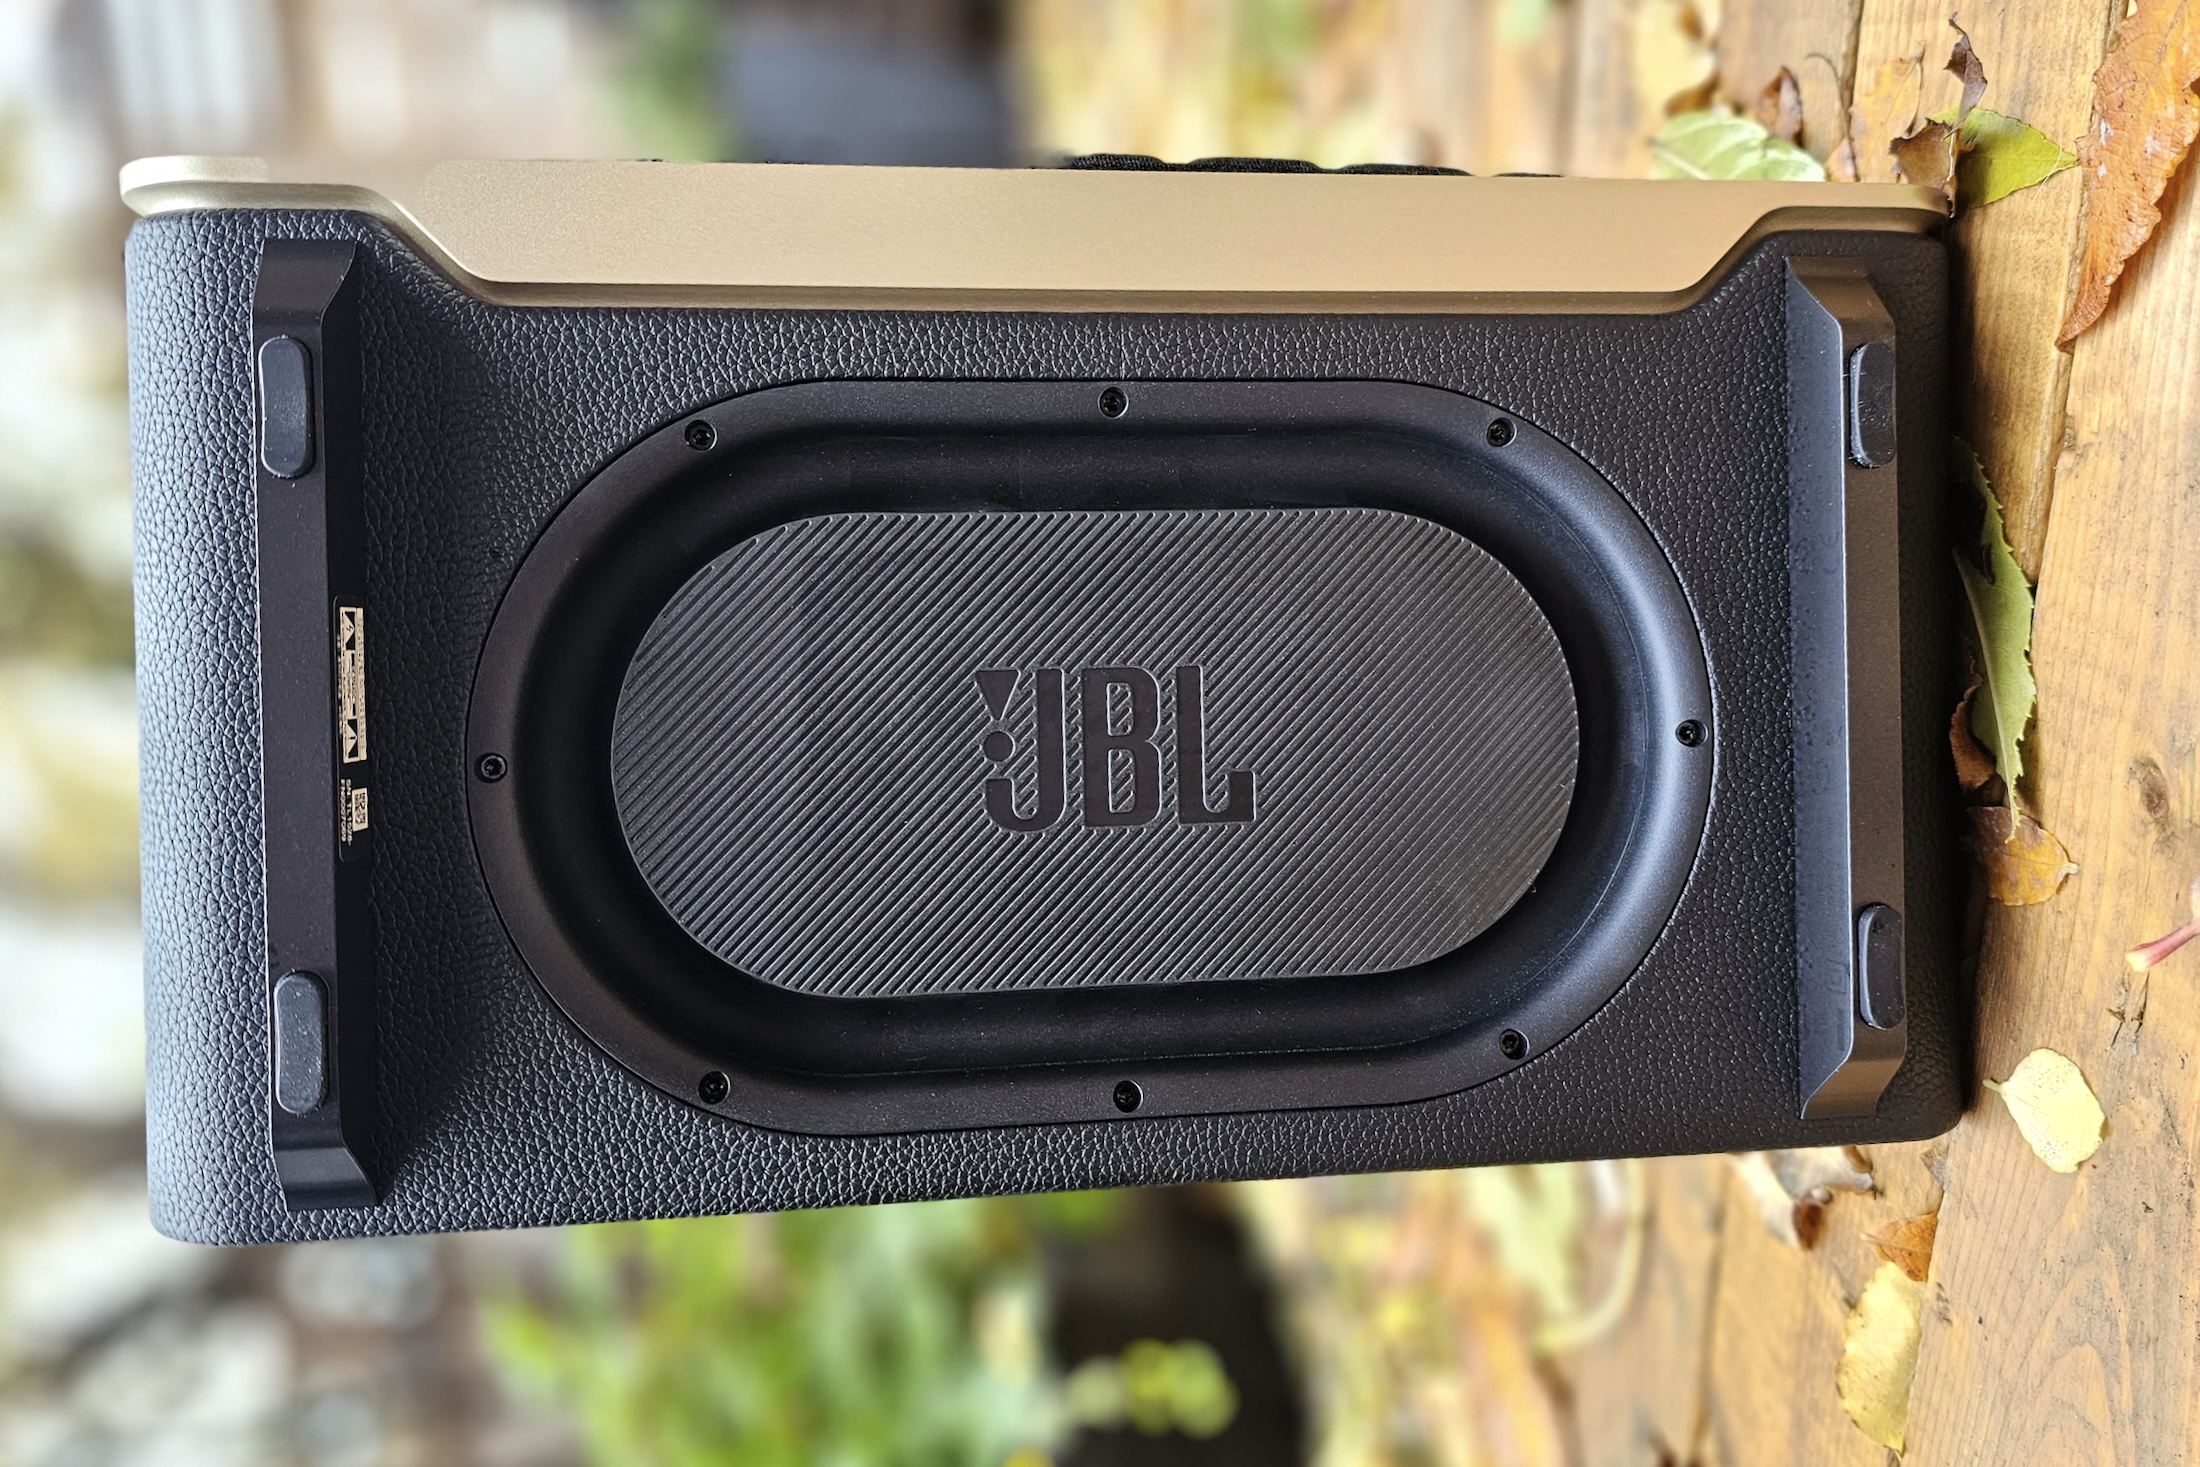 JBL Authentics 300 smart speaker review: two assistants at once - The Verge